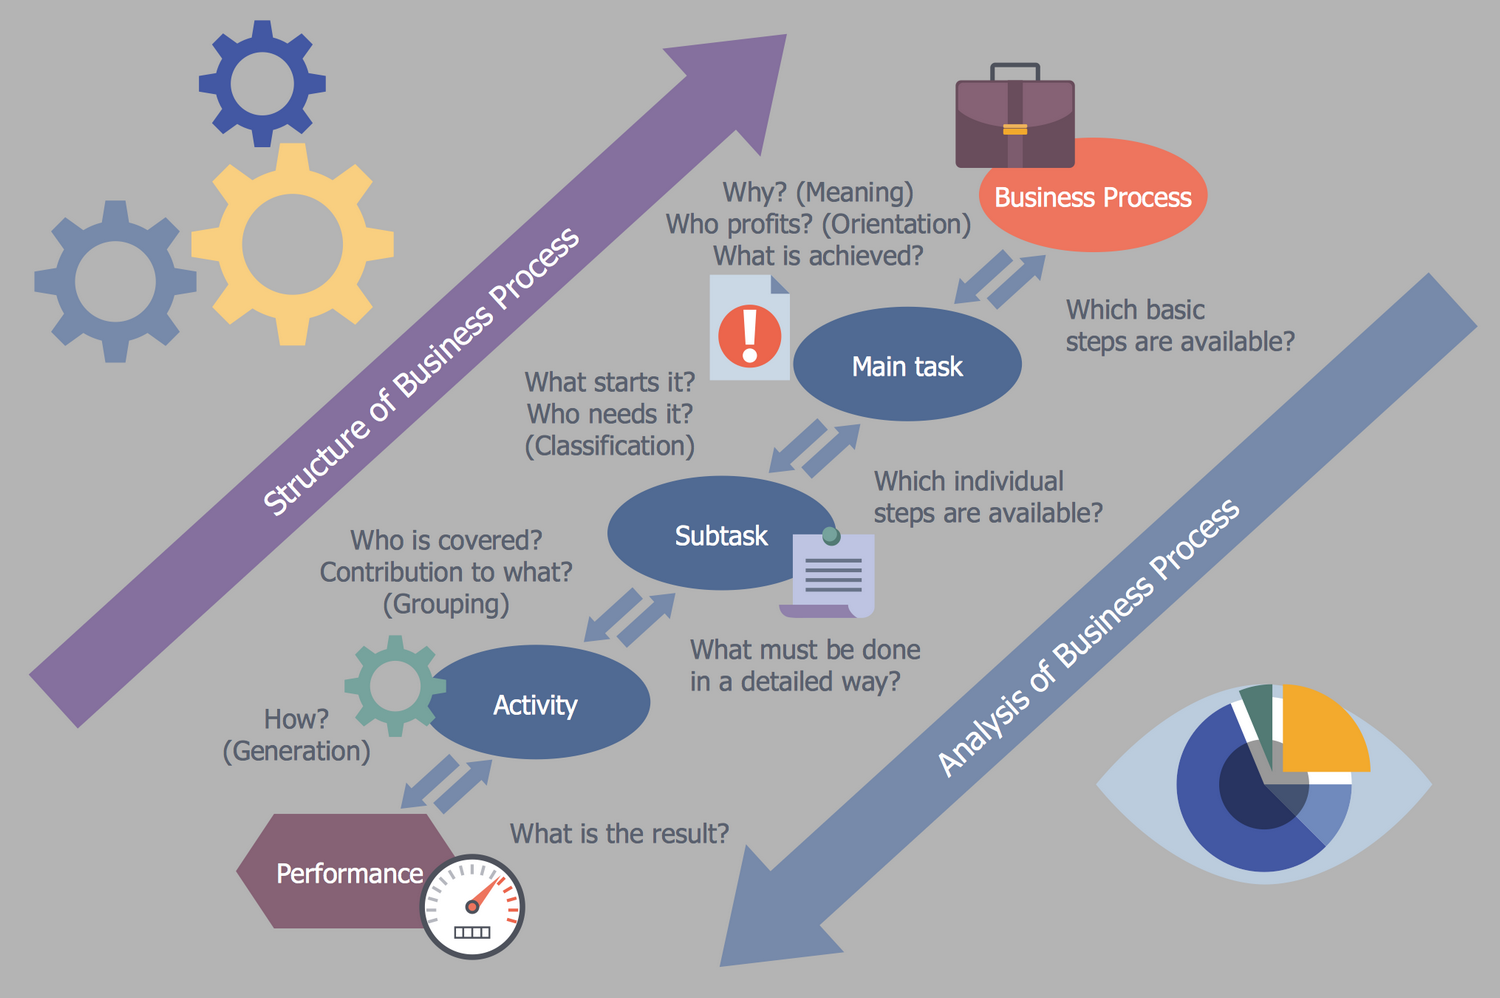 Business Process Workflow Diagram - Structure and Analysis